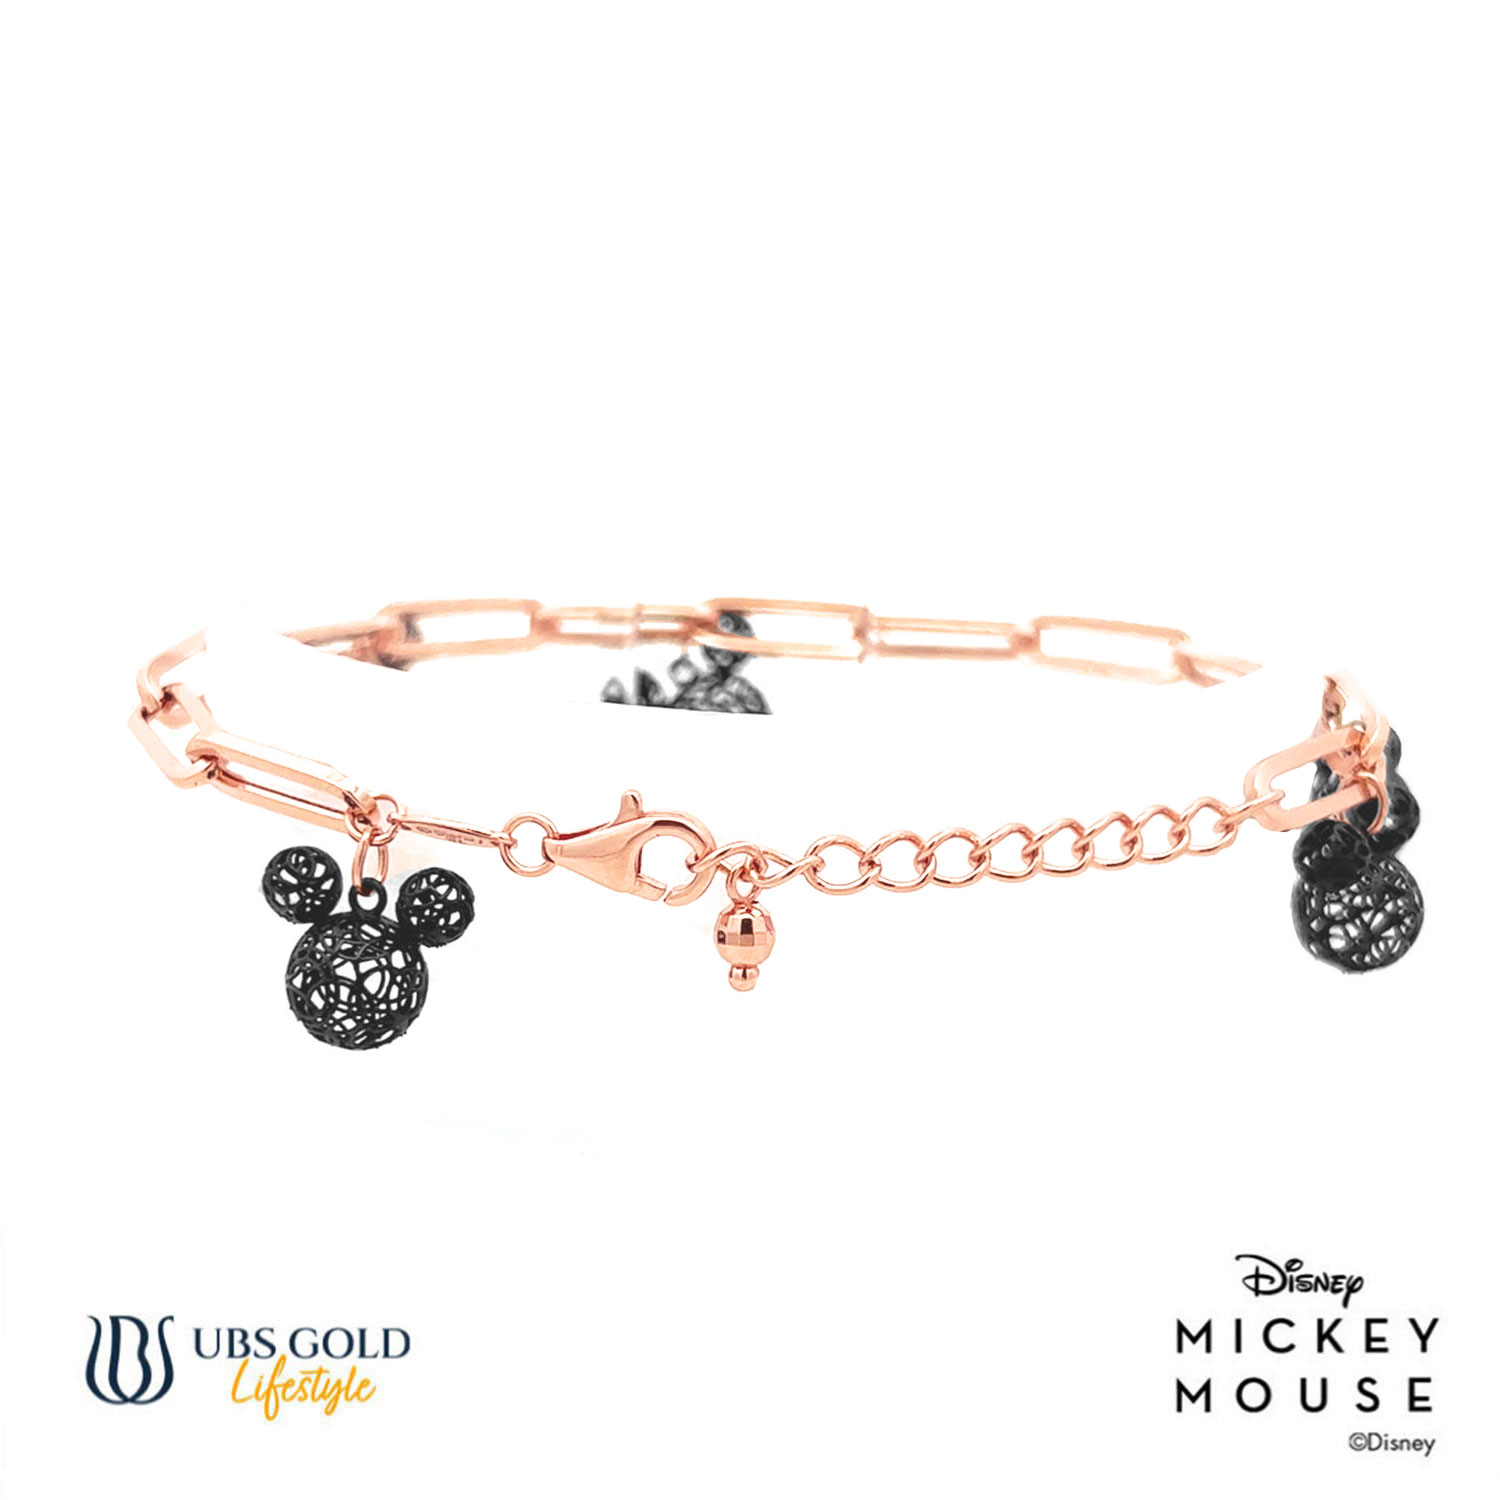 UBS Gold Gelang Emas Disney Mickey Mouse - Hgy0147P - 17K